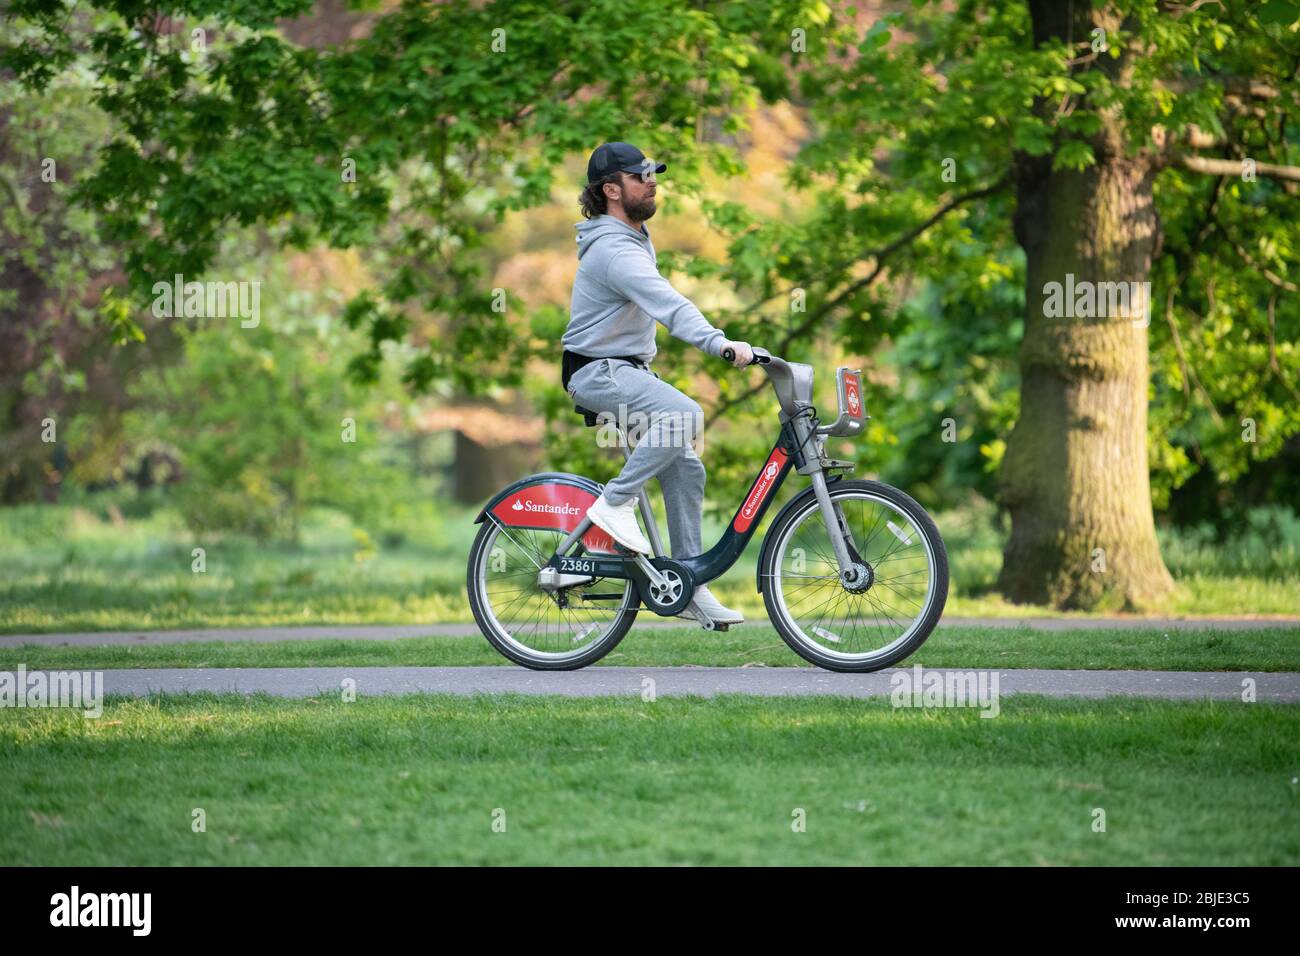 Cyclist on rented Santander bike wearing protective gloves and in London Lockdown. Stock Photo